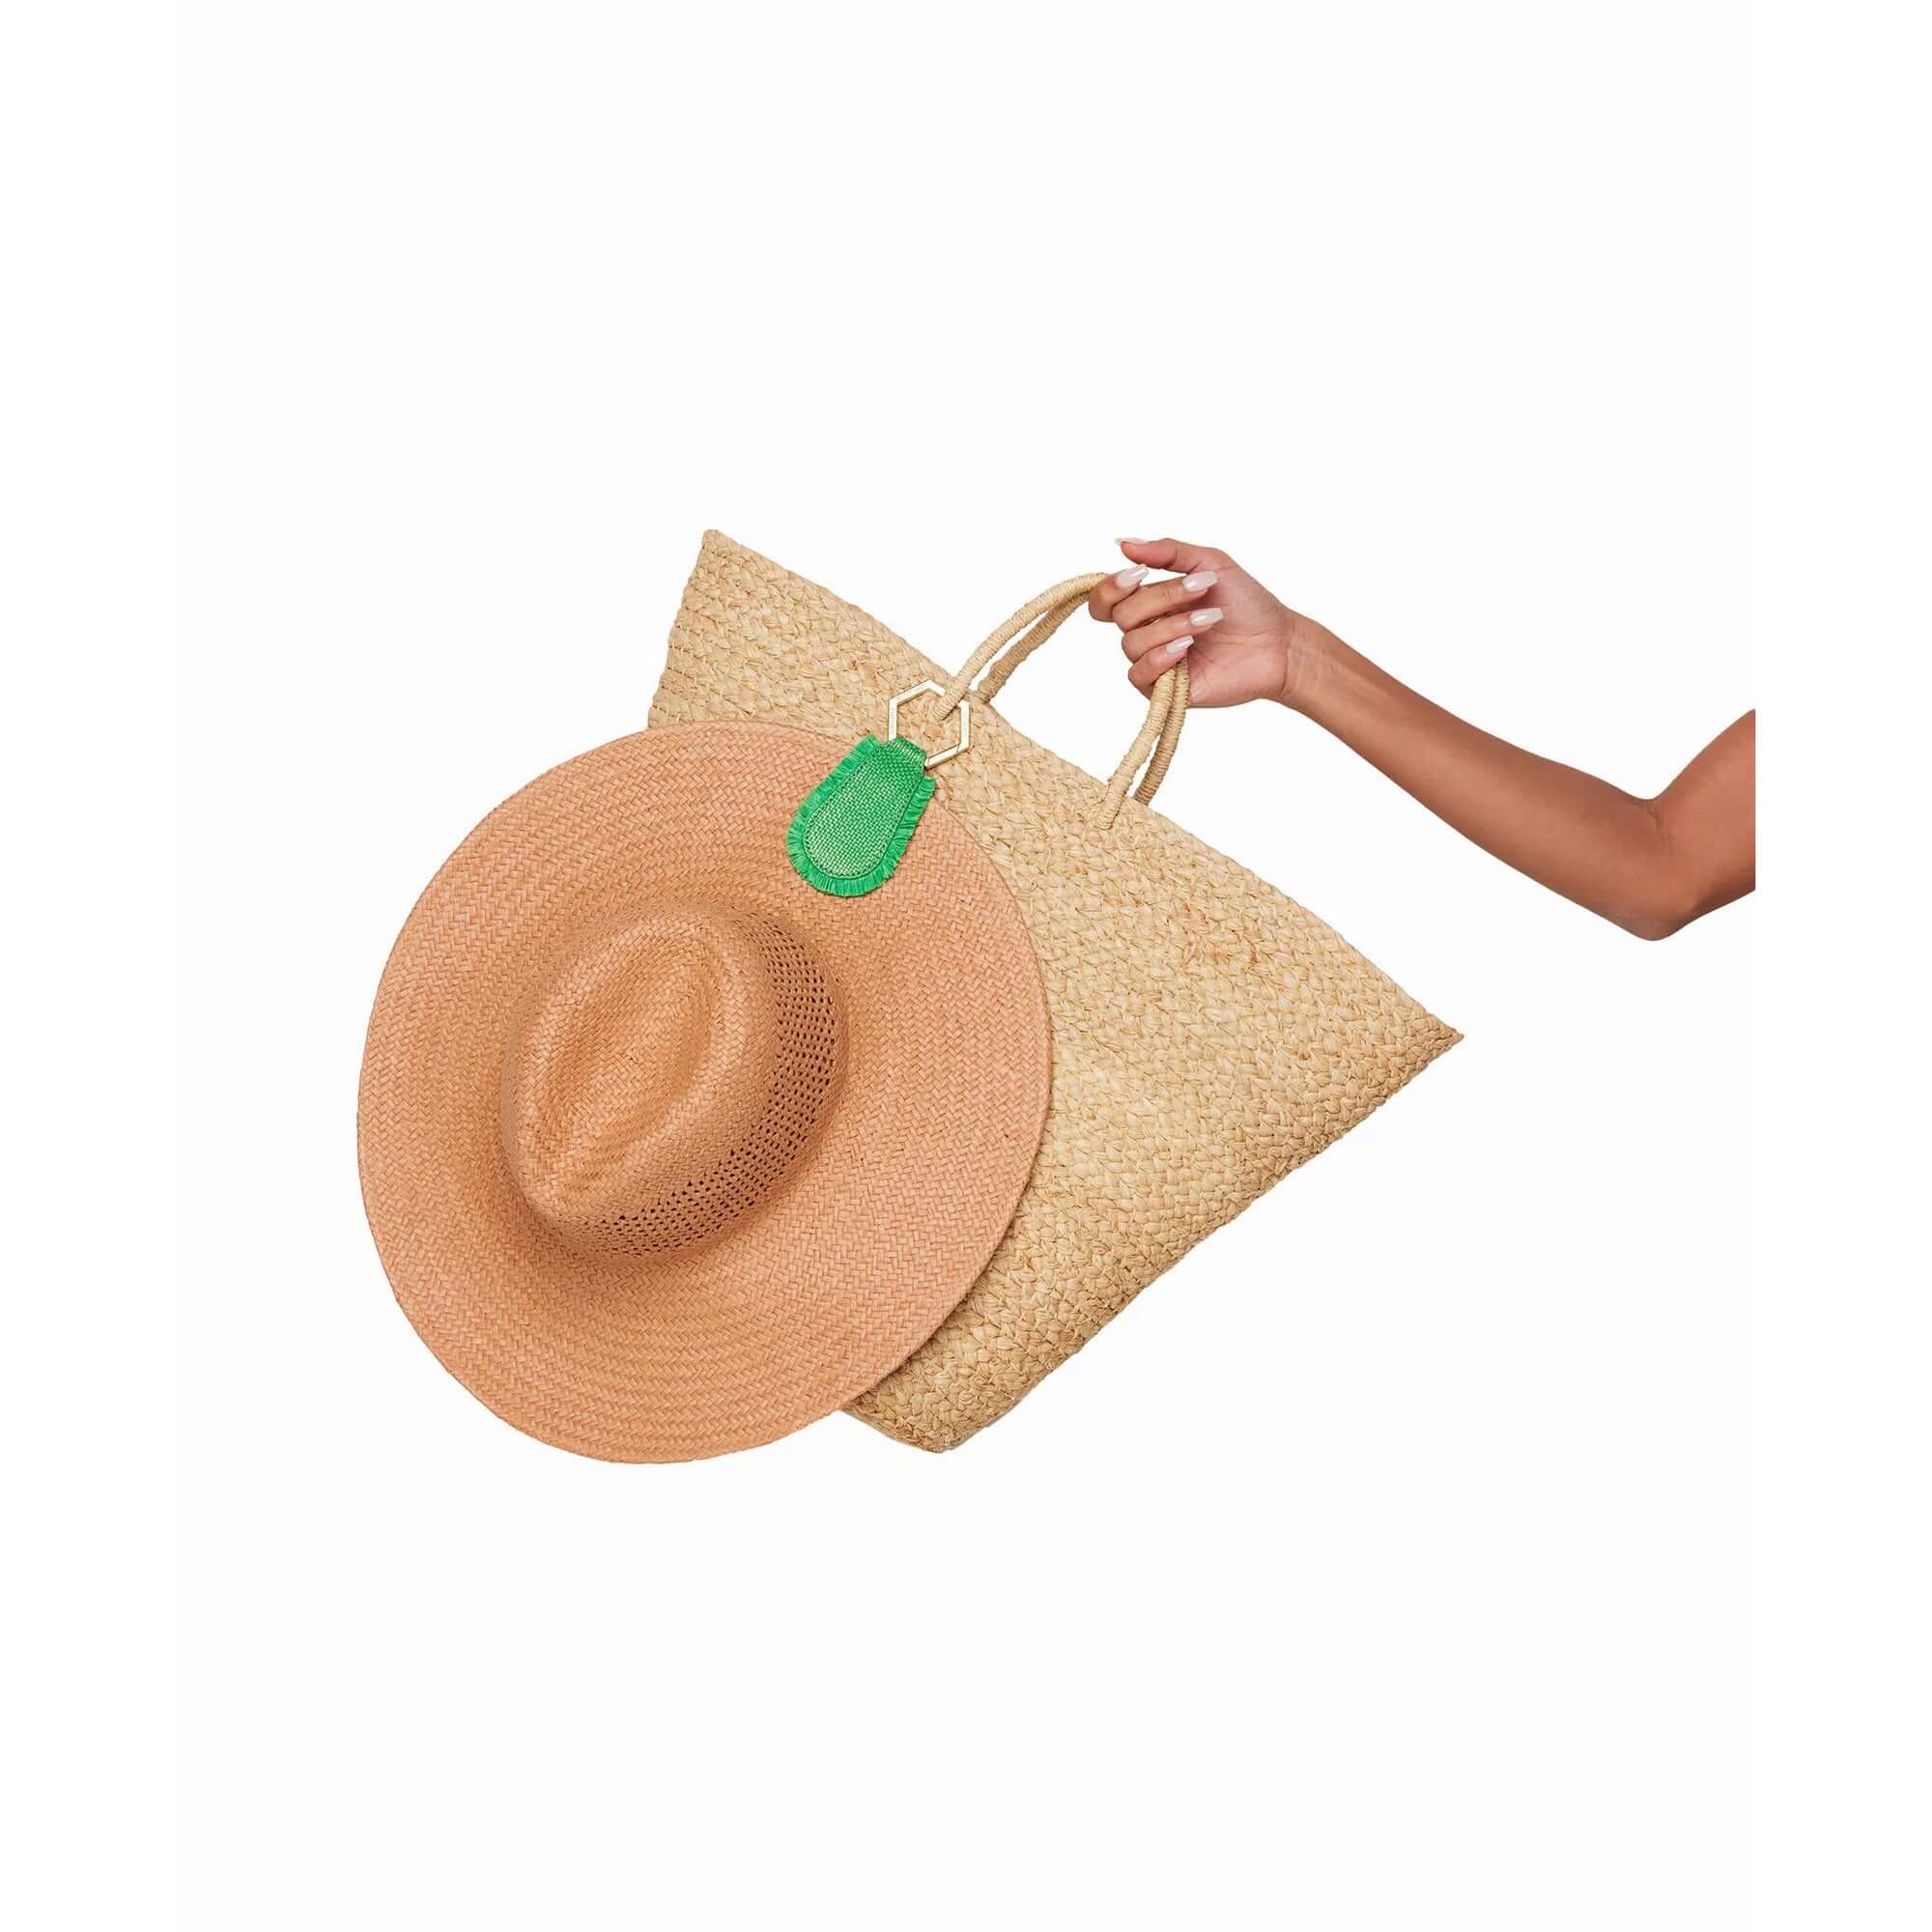  The fray raffia TOPTOTE magnetic hat clip in green attaches to your bag and allows you to travel with your hat hands free.